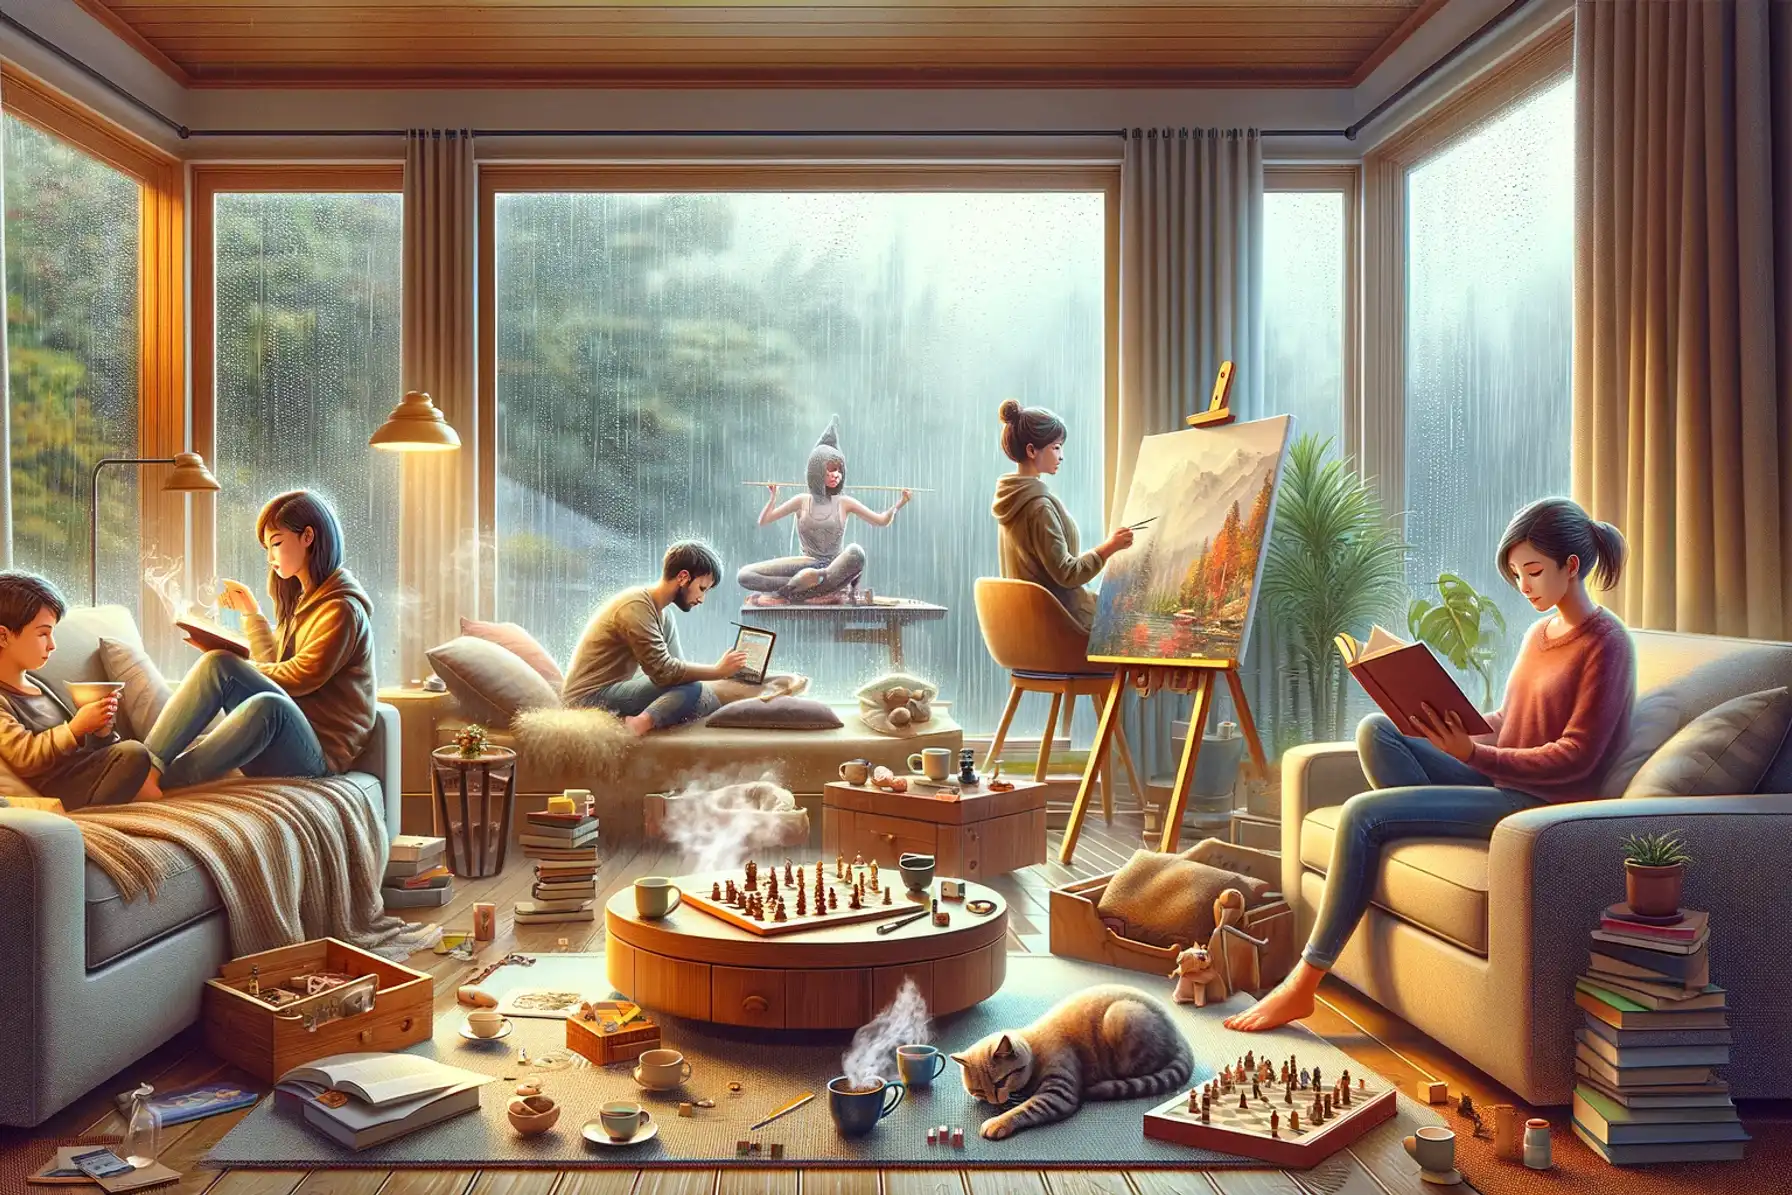 The top 10 indoor activities to enjoy on a rainy day